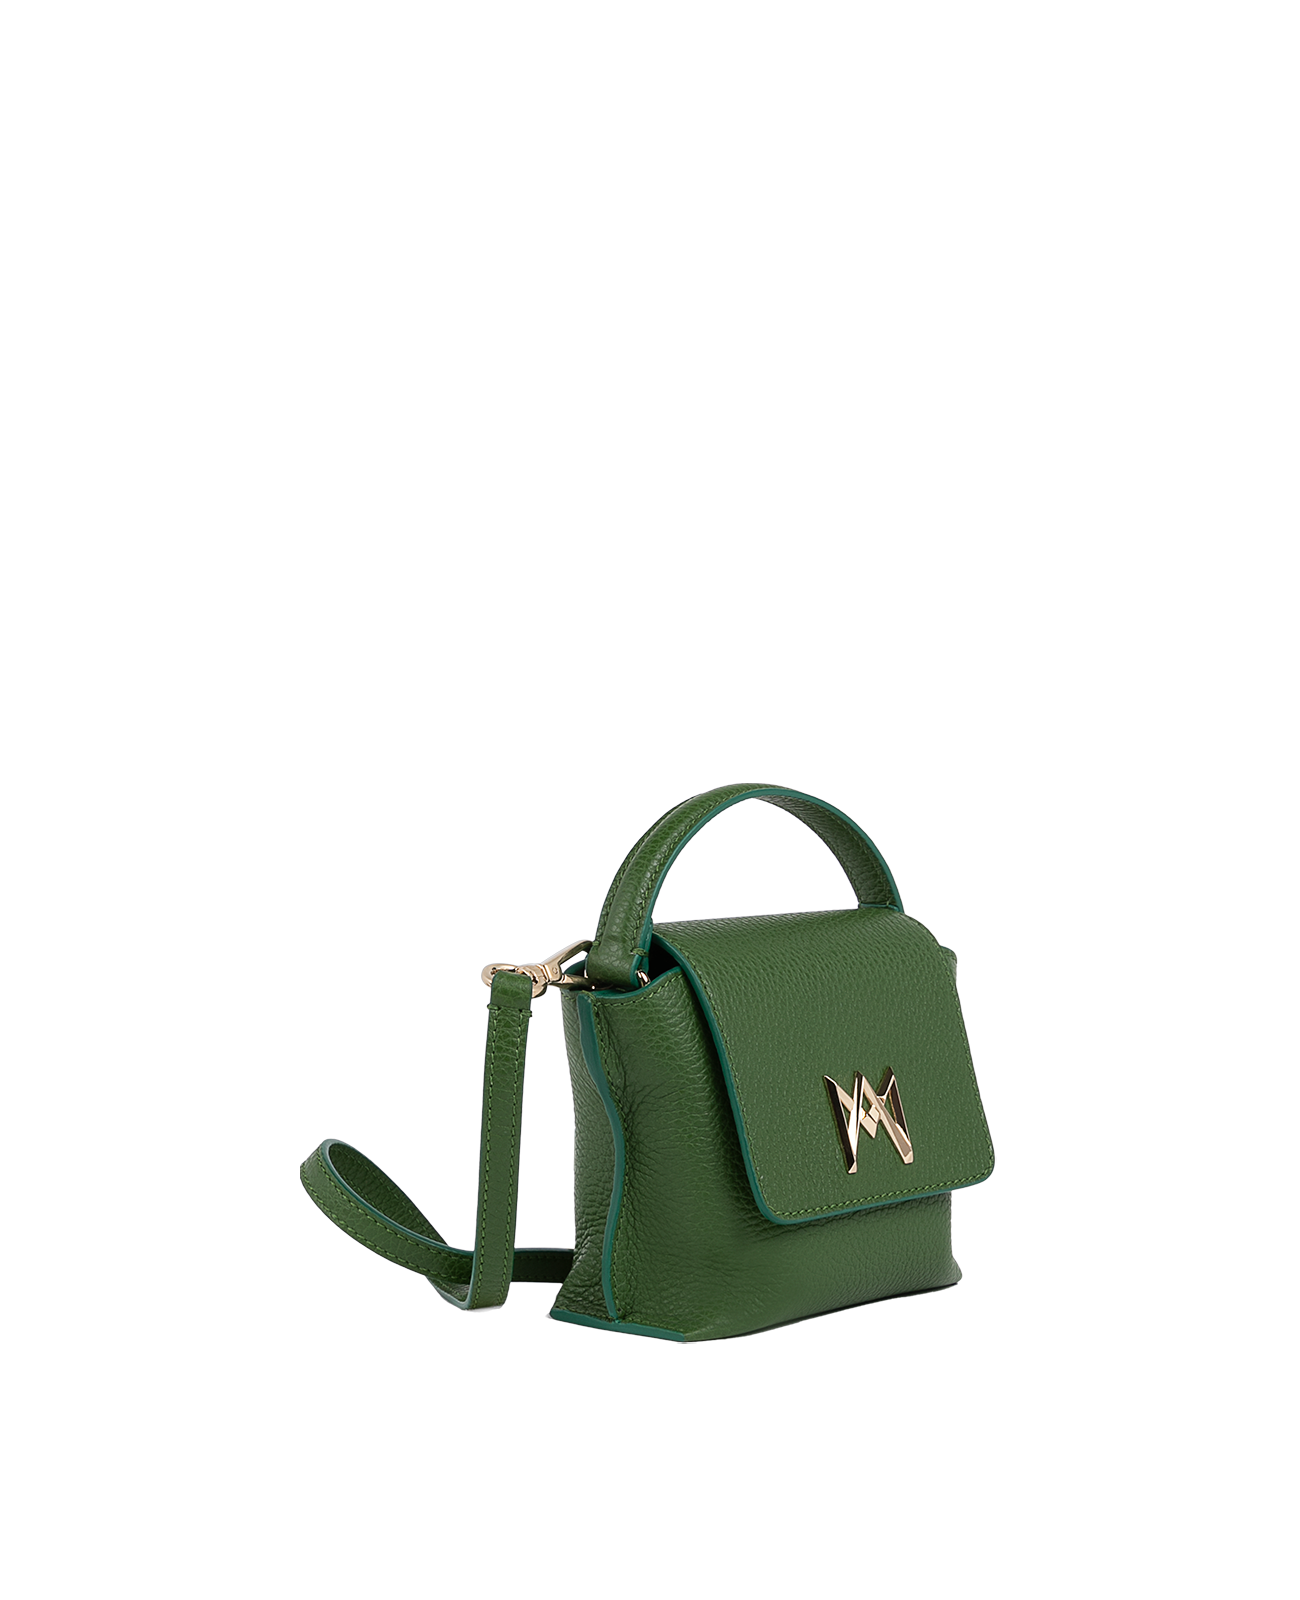 Cross-body bag in Italian full-grain leather, semi-aniline calf Italian leather with detachable shoulder strap.Three compartments, zip pocket in the back compartment. Magnetic flap closure with logo. Color: Green. Size: Mini.